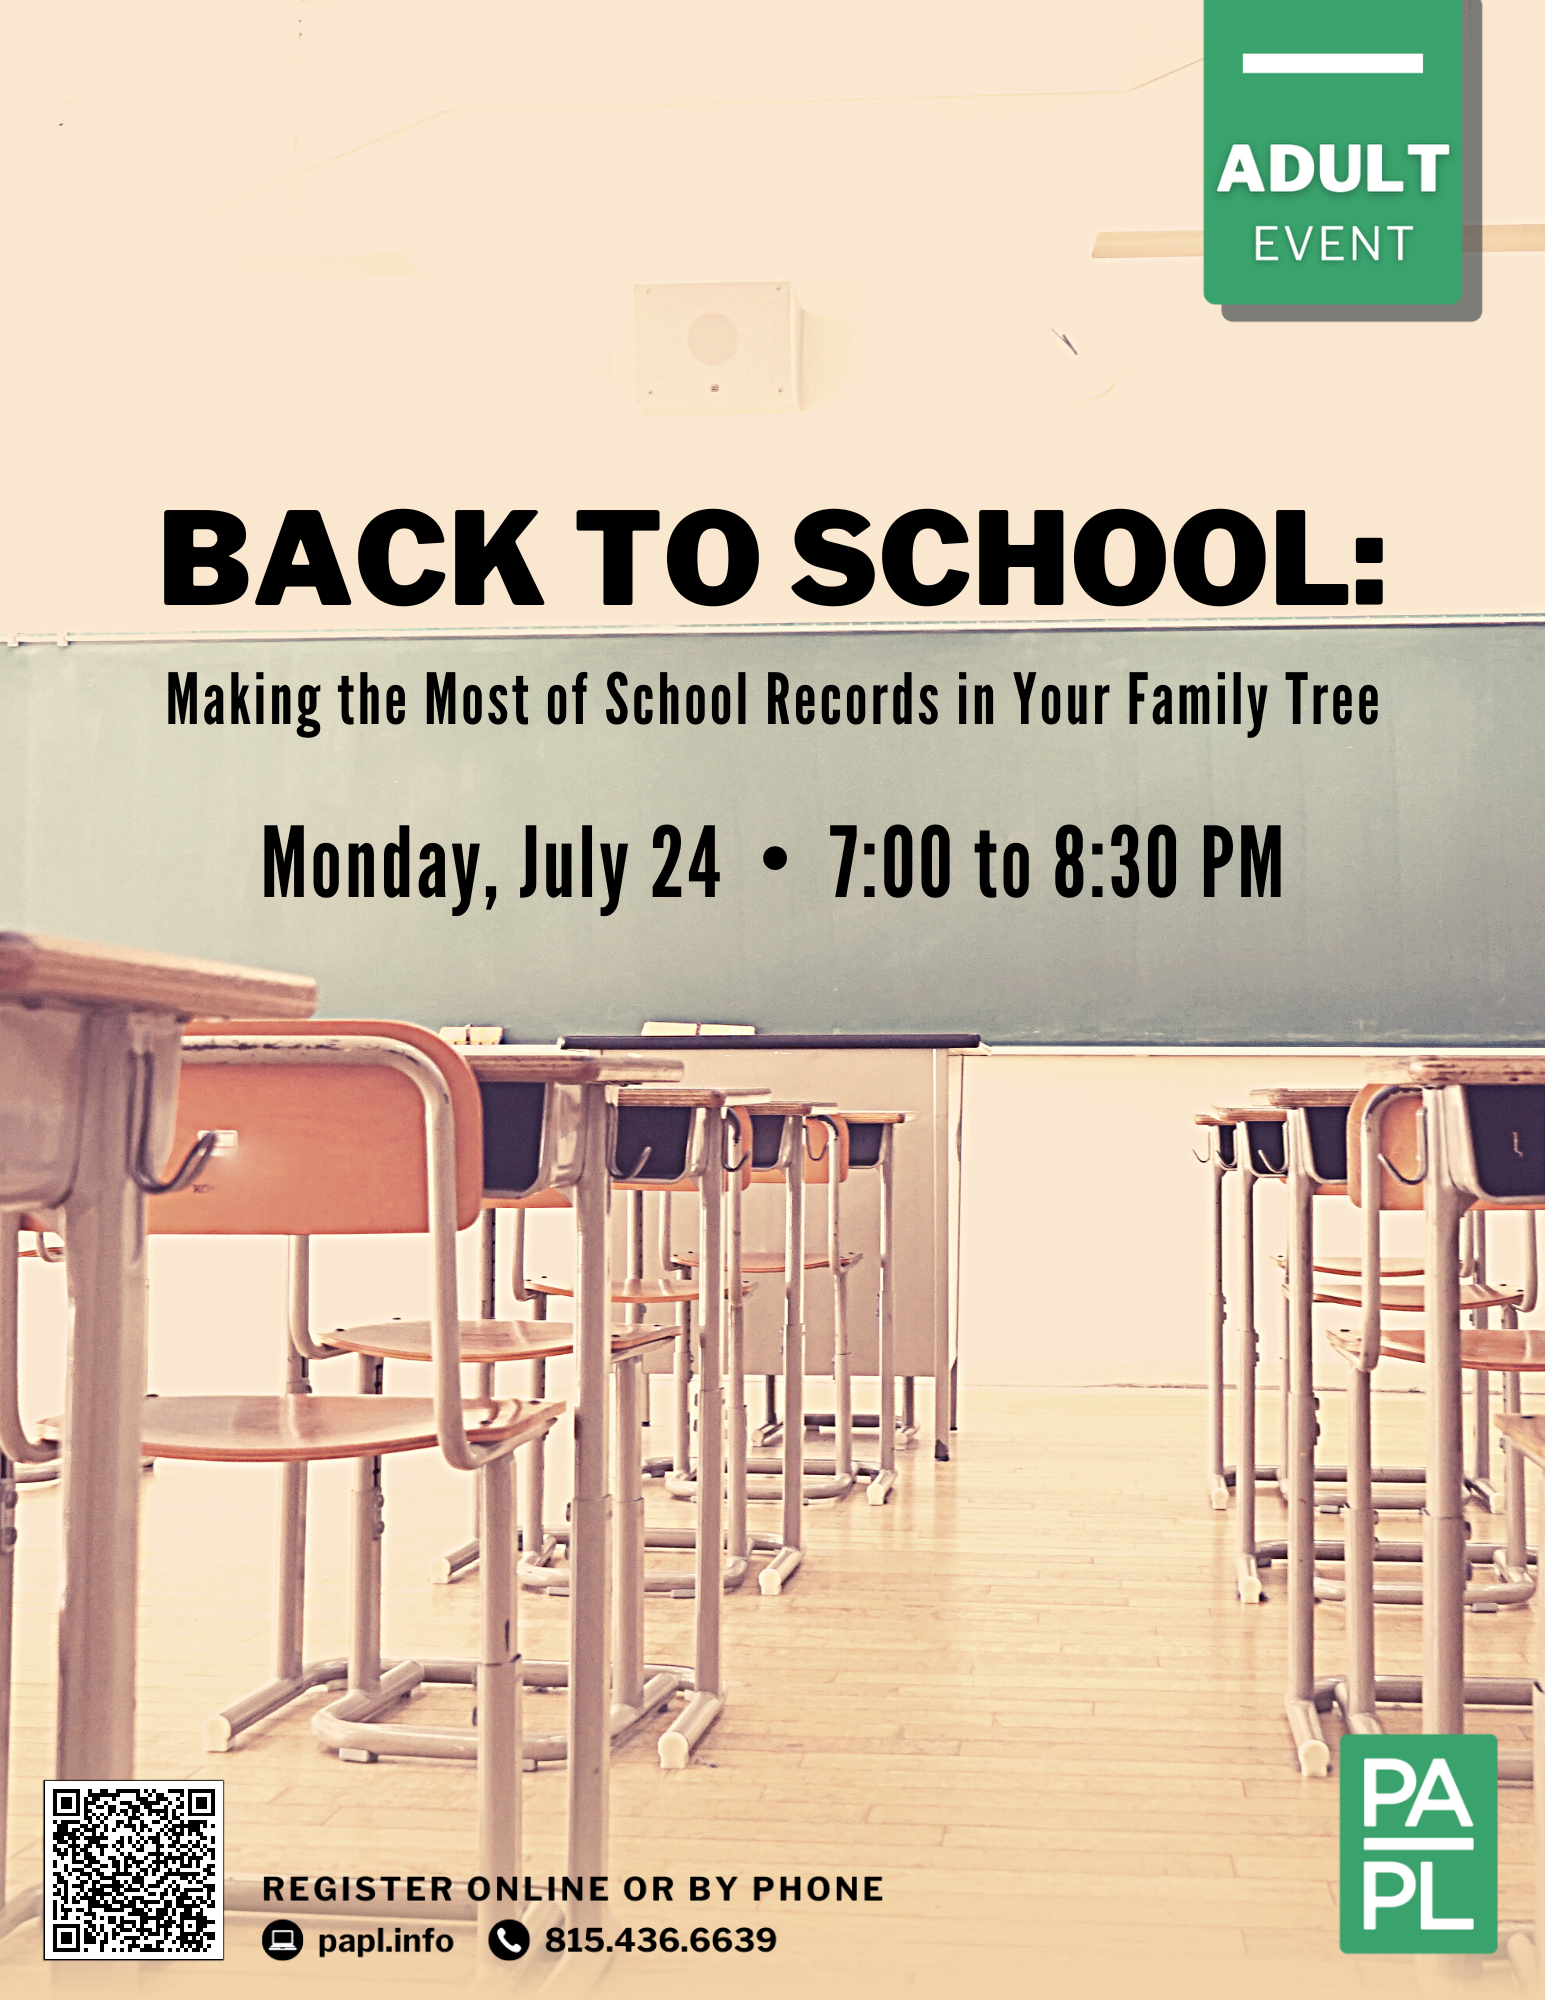 Back to School: Making the Most of School Records in Your Family Tree